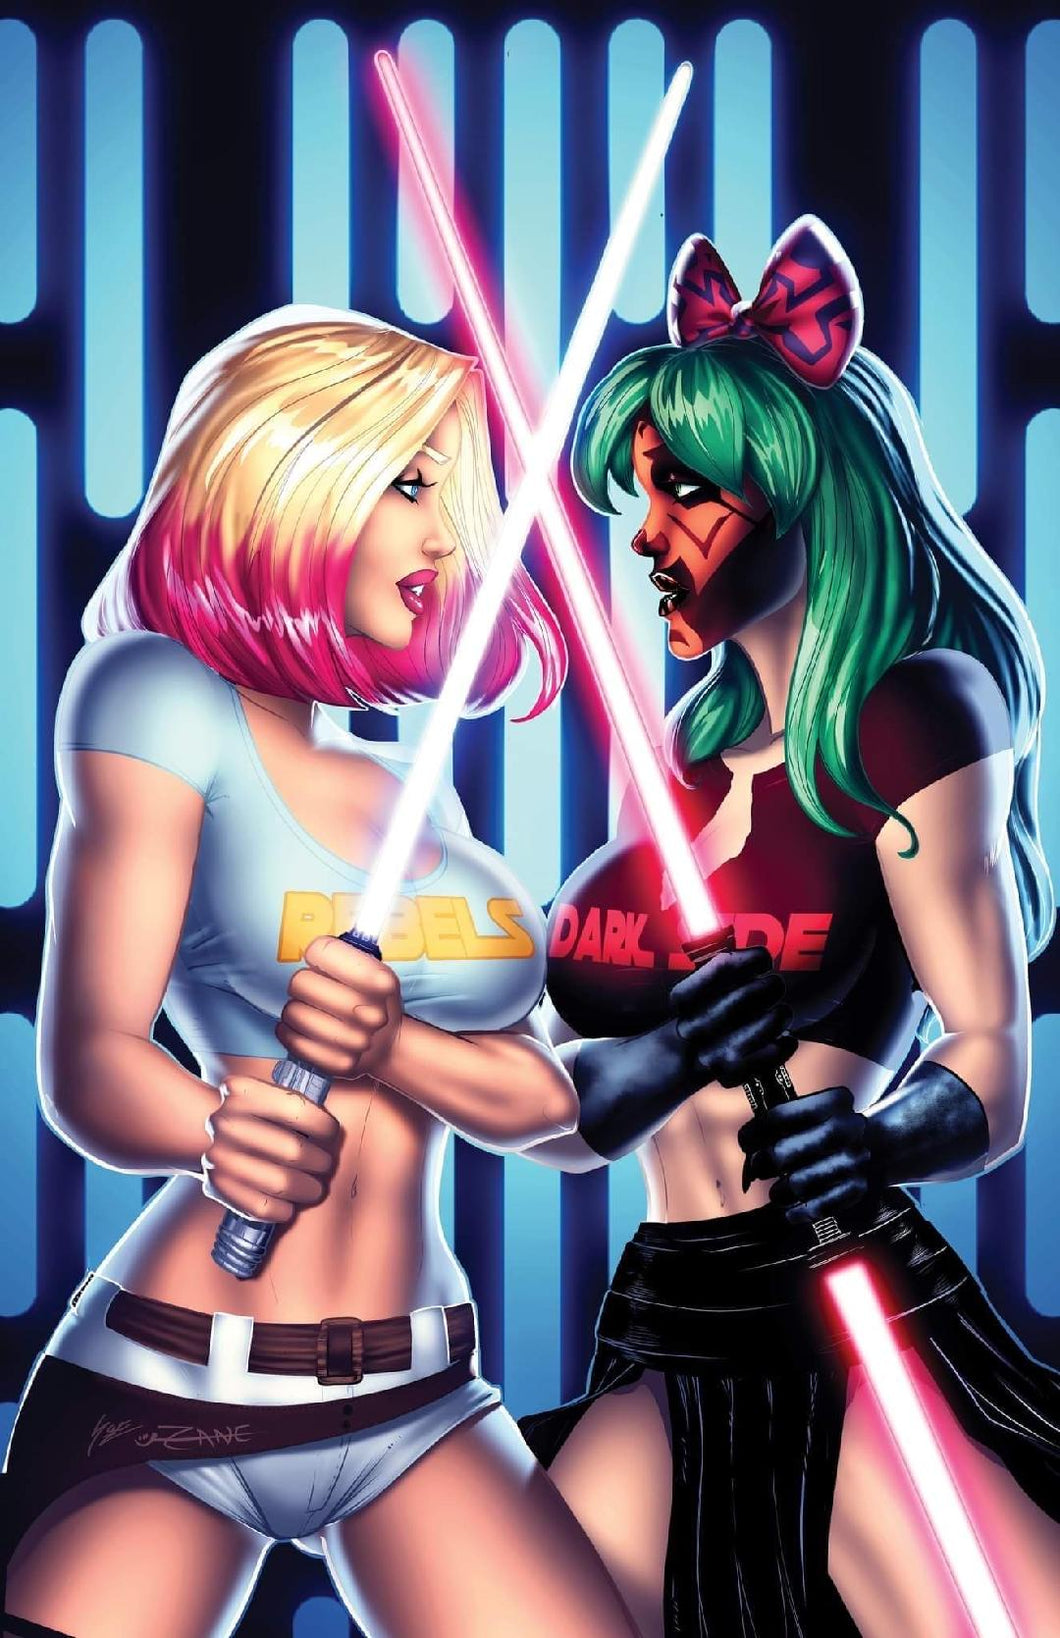 Totally Rad Wars Rebels vs Dark Side Lightsaber Duel Star Wars Cosplay Nice & Naughty 2 Book Variant Cover Set by CB Zane Limited to 50 BooKooComix Exclusive!!!